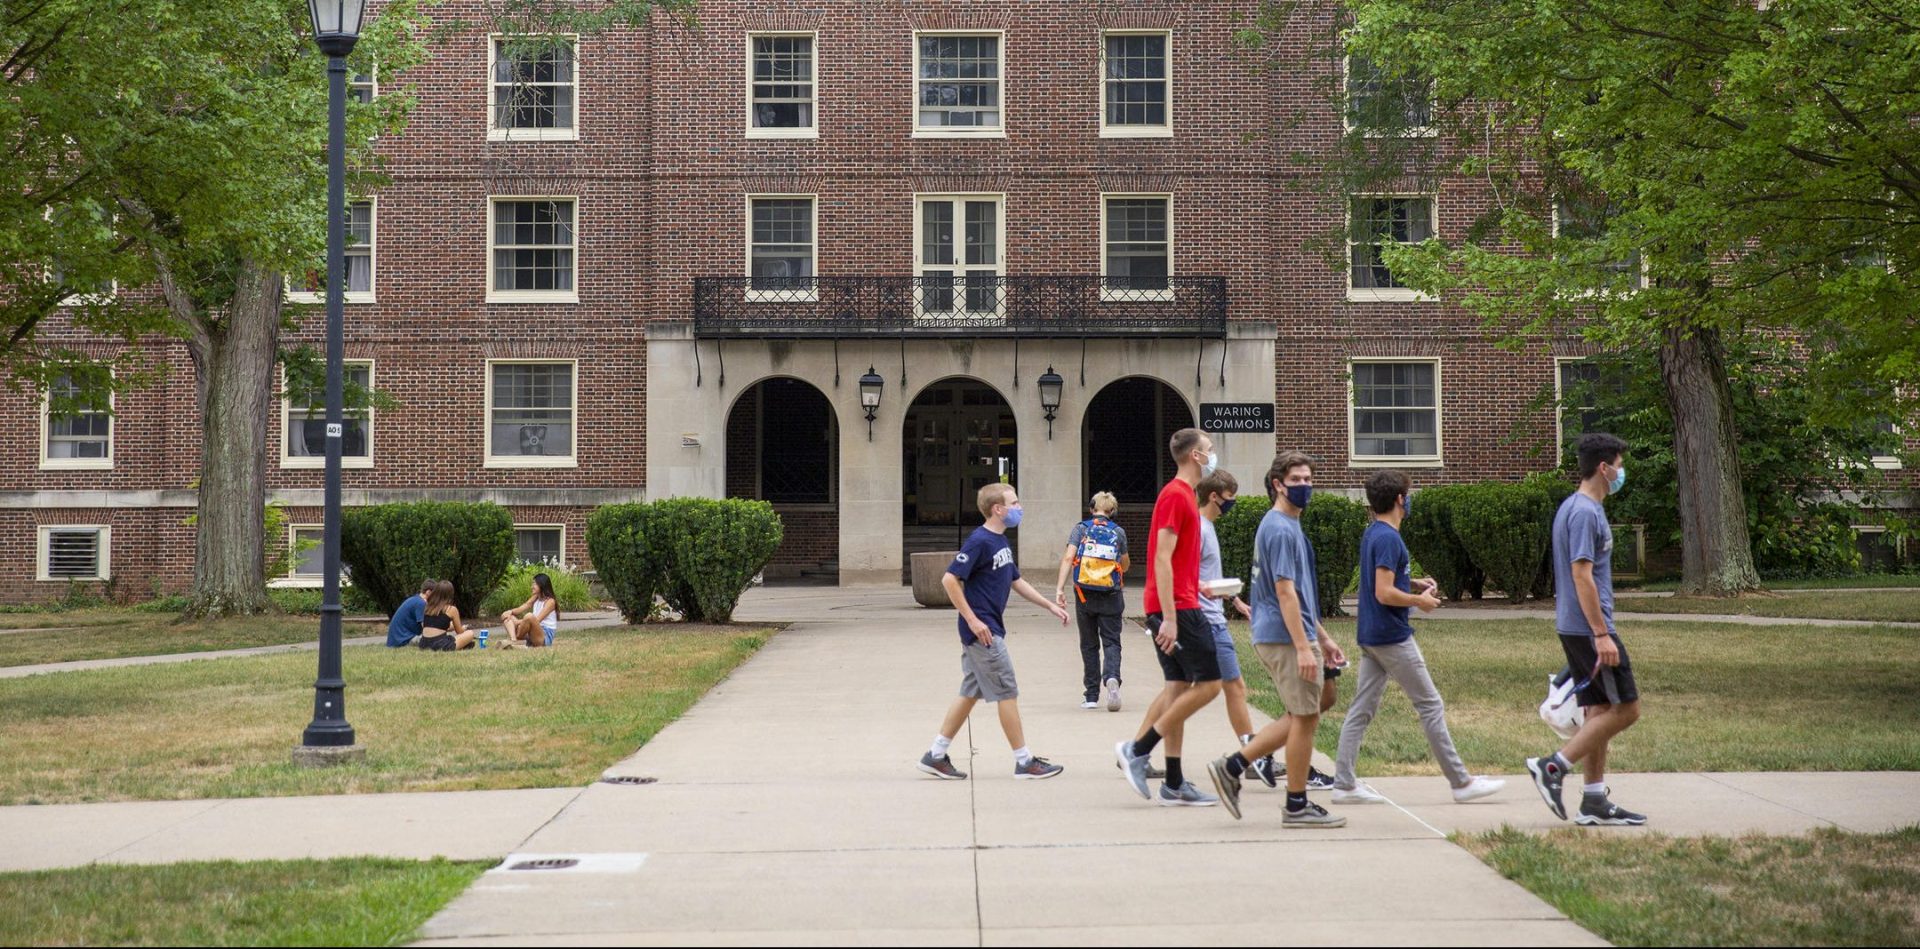 Penn adds 352 COVID-19 at Park, offers free walk-up testing for employees | WITF